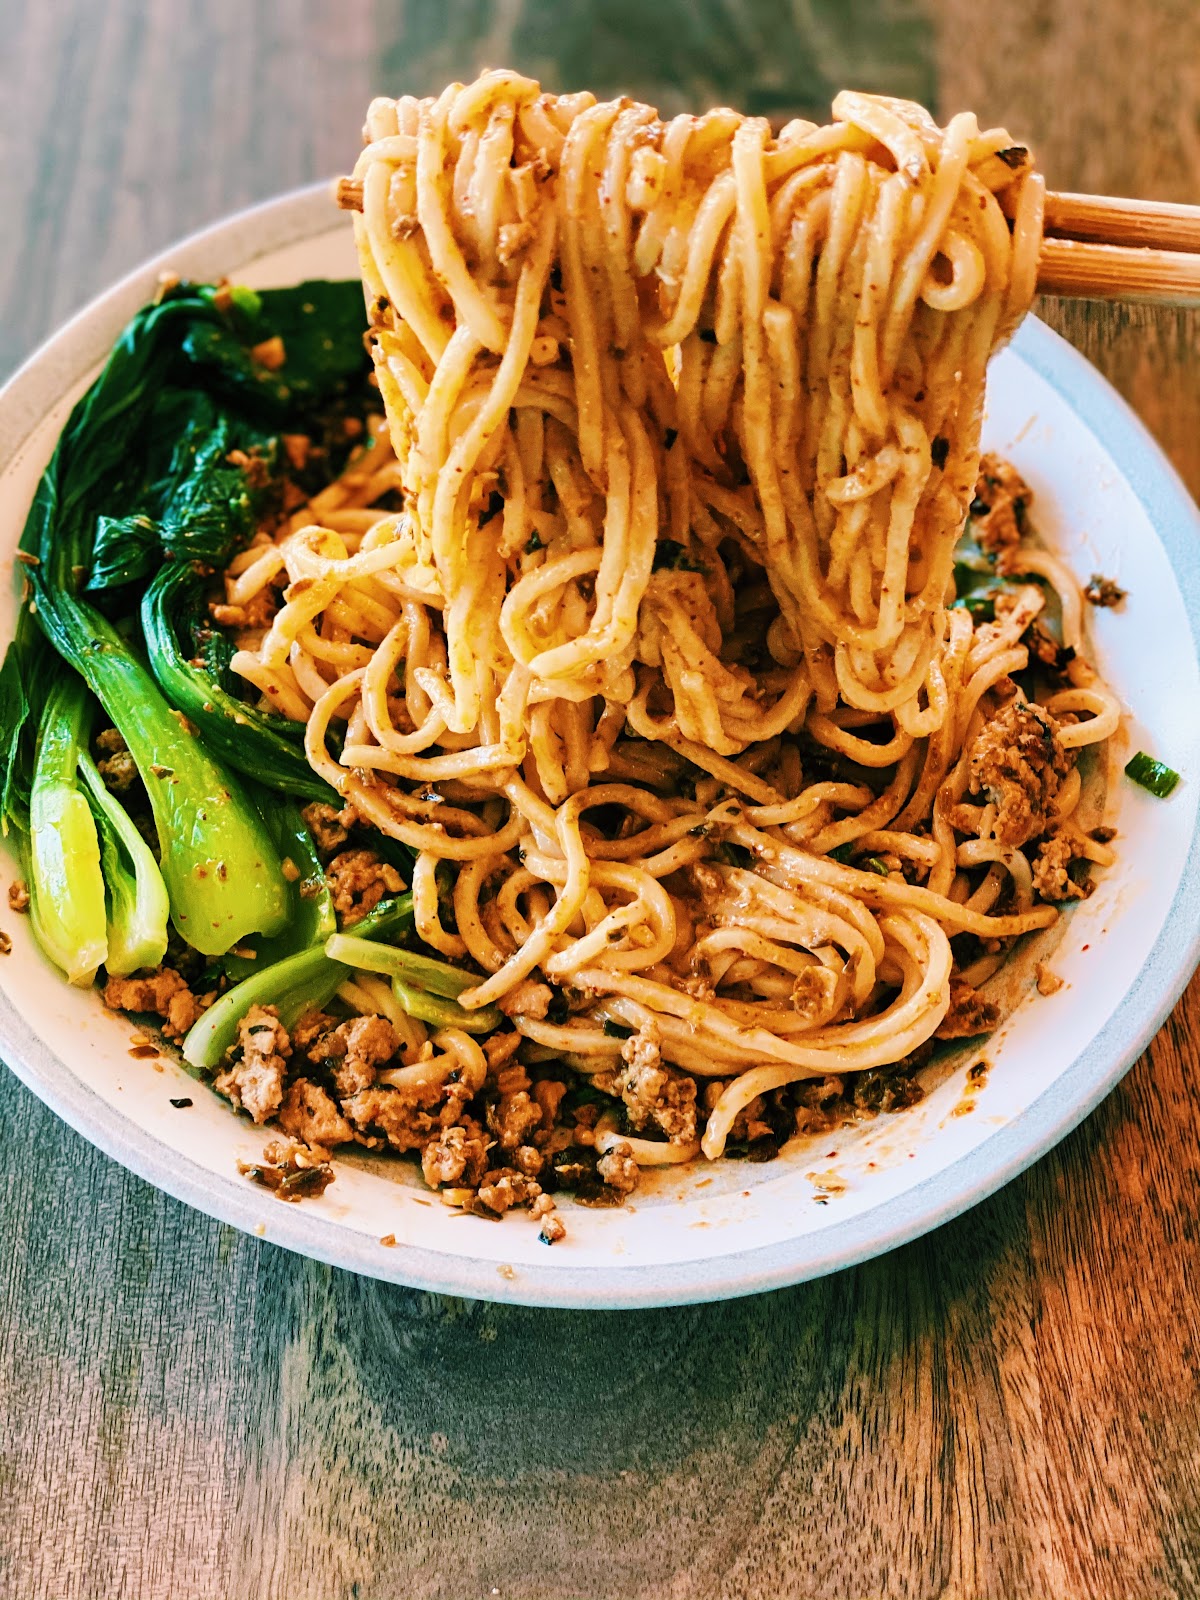 A bowl of Dan Dan Noodles, egg noodles mixed with spicy chili ground pork and garnished with baby bok choy and green onions